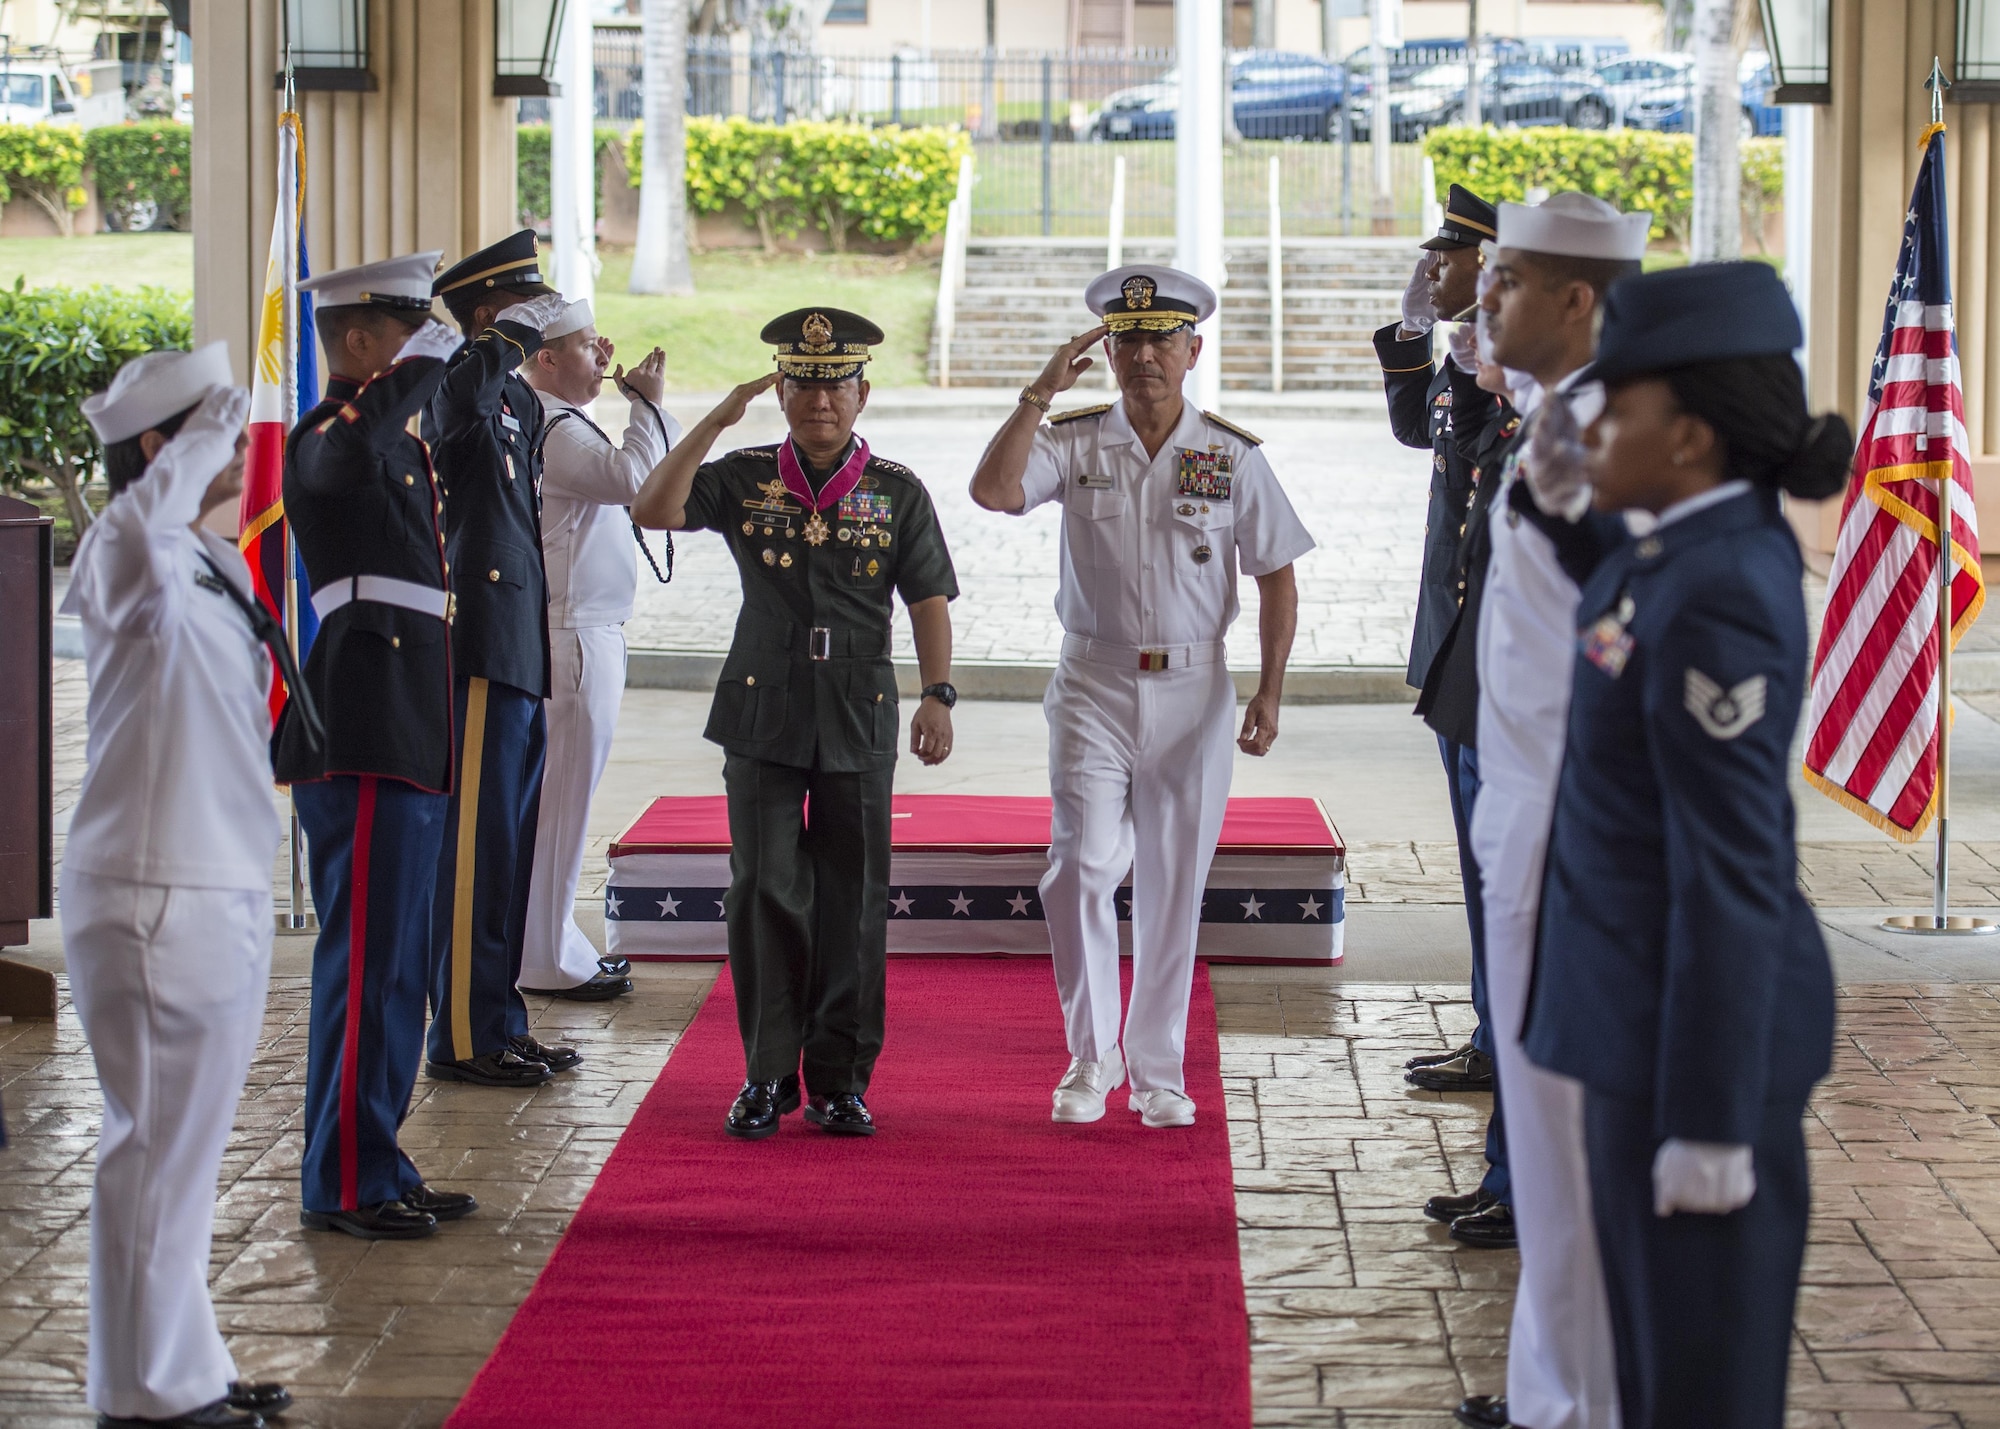 CAMP H.M. SMITH, Hawaii (Sept. 28, 2018)—Adm. Harry Harris, Commander of U.S. Pacific Command (PACOM), and Gen. Eduardo Año, Chief of Staff for the Armed Forces of the Philippines, are welcomed at PACOM headquarters during an honors ceremony. During Año’s two-day visit to PACOM, he and Harris will meet to discuss changes to the Mutual Defense Board and Security Engagement Board. The Mutual Defense Board provides direct liaison and consultation on military matters of mutual concern to develop and improve both countries’ common defense. The Security Engagement Board provides the framework and mechanism for continuing liaison and consultation on non-traditional threats to security such as terrorism, transnational crimes, maritime security, and natural and man-made disasters. (U.S. Navy photo by Mass Communication Specialist 2nd Class James Mullen/Released)